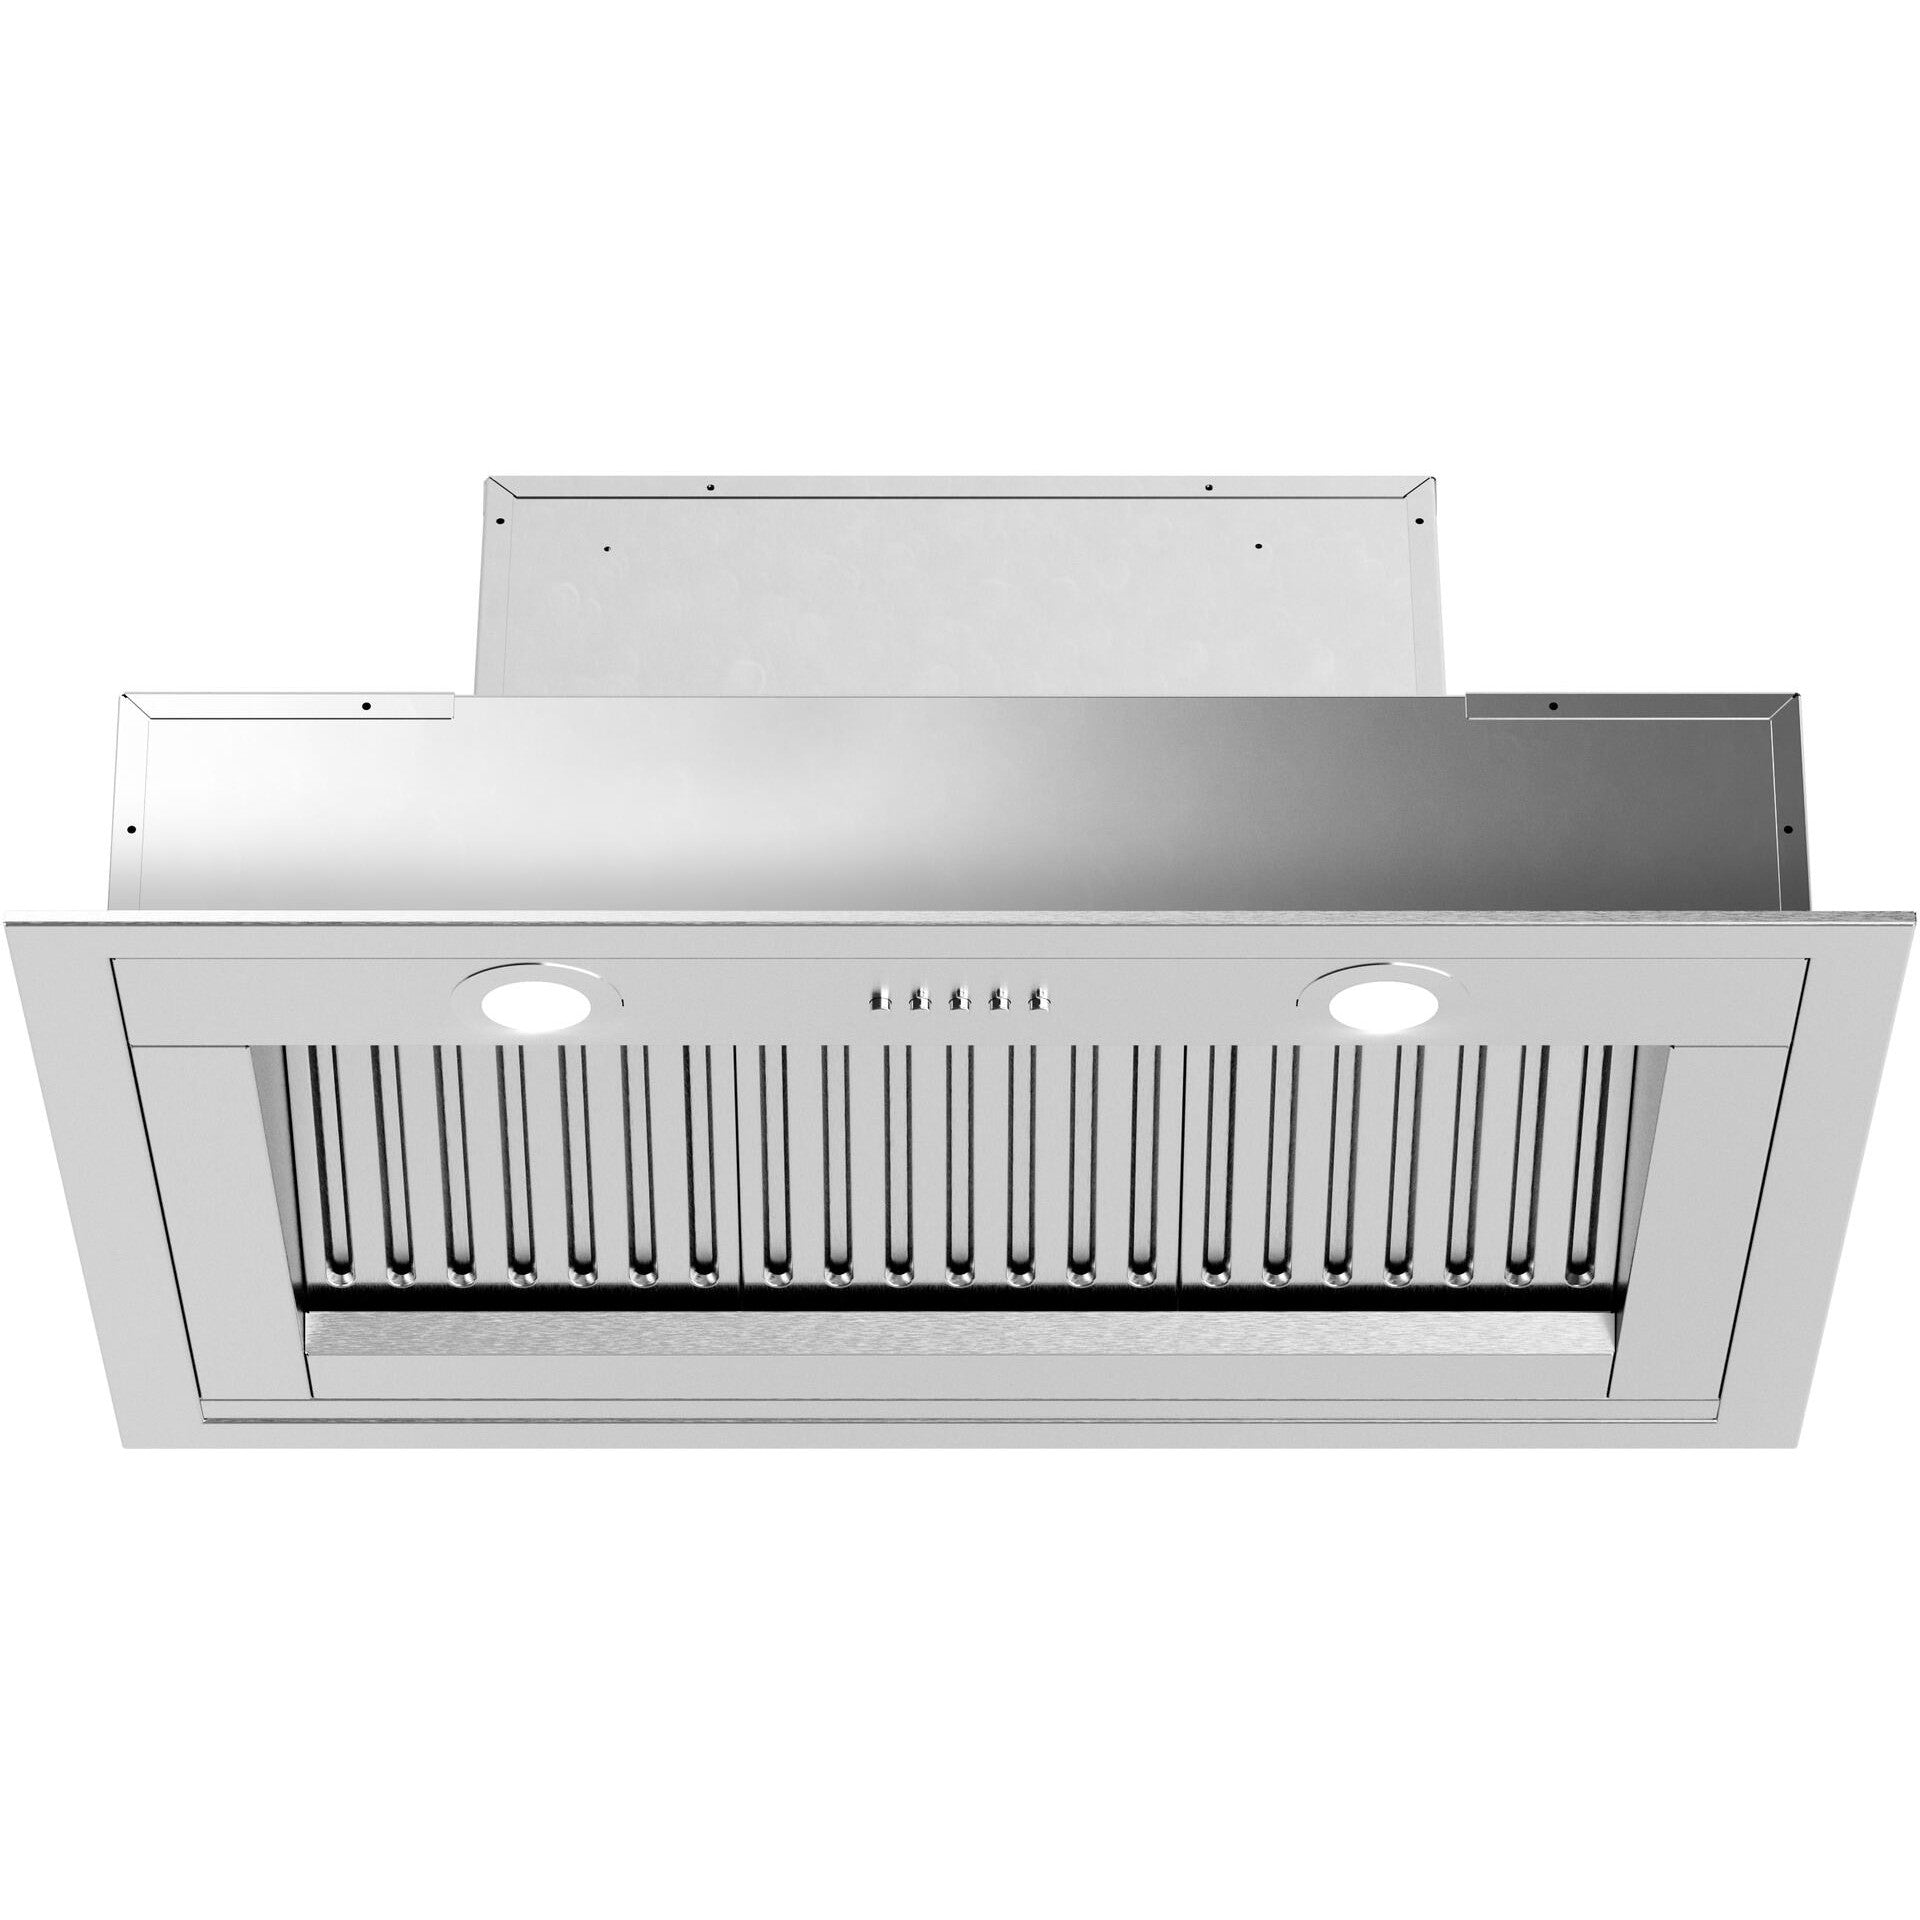 Forte Liberta 34" 600 CFM Convertible Residential Round Duct Stainless Steel Cabinet Insert Range Hood With Recirculating Kit, Charcoal Filters, and LED Lighting